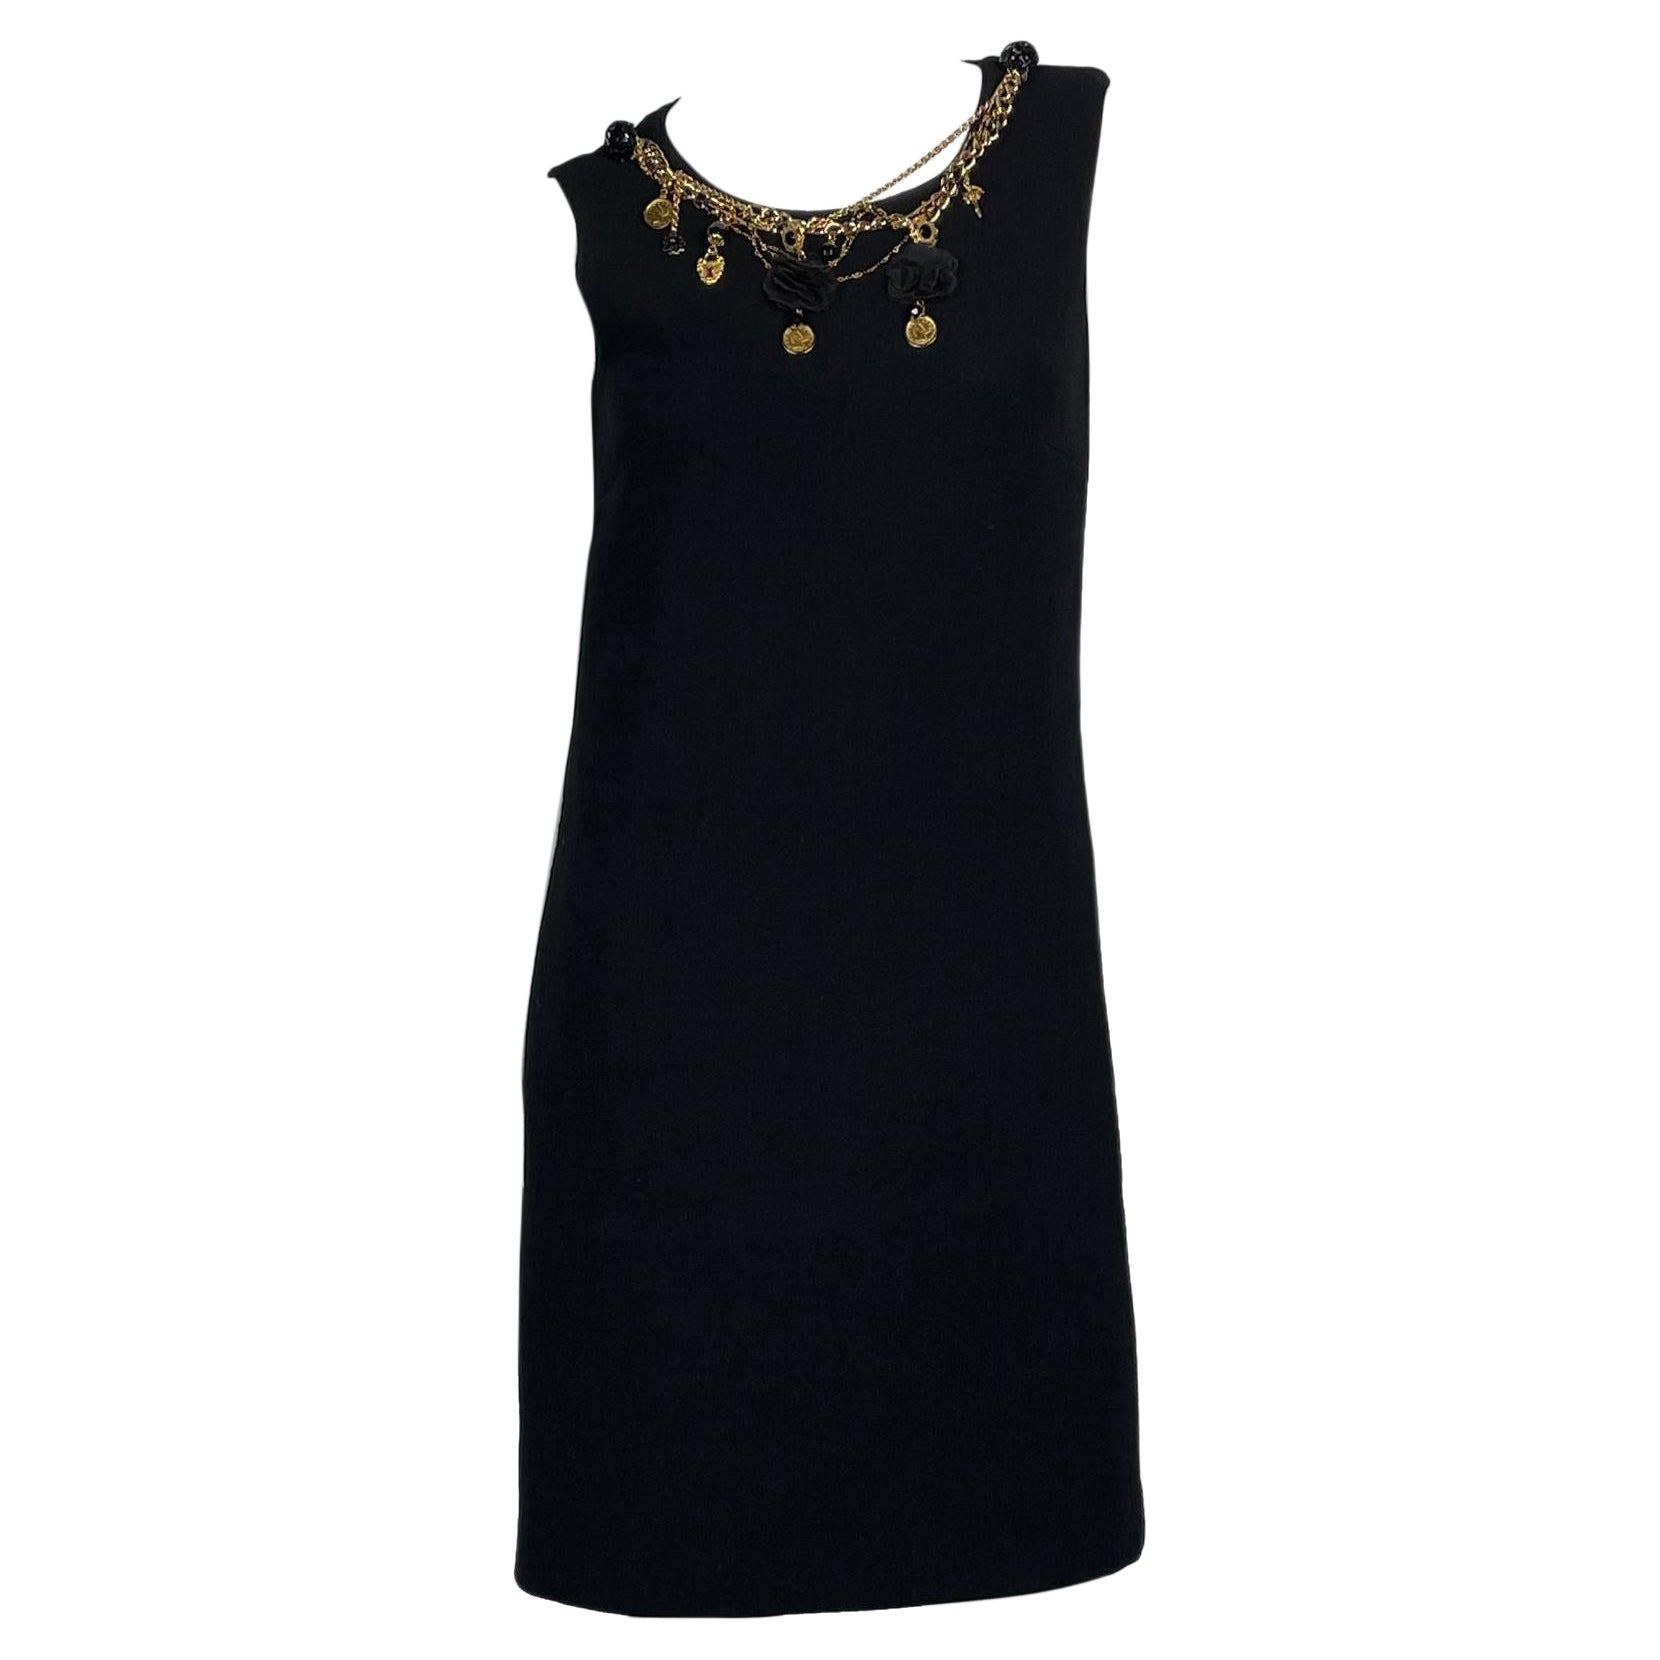 Dolce&Gabbana black wool mini dress with medallions necklace, 2010s For Sale